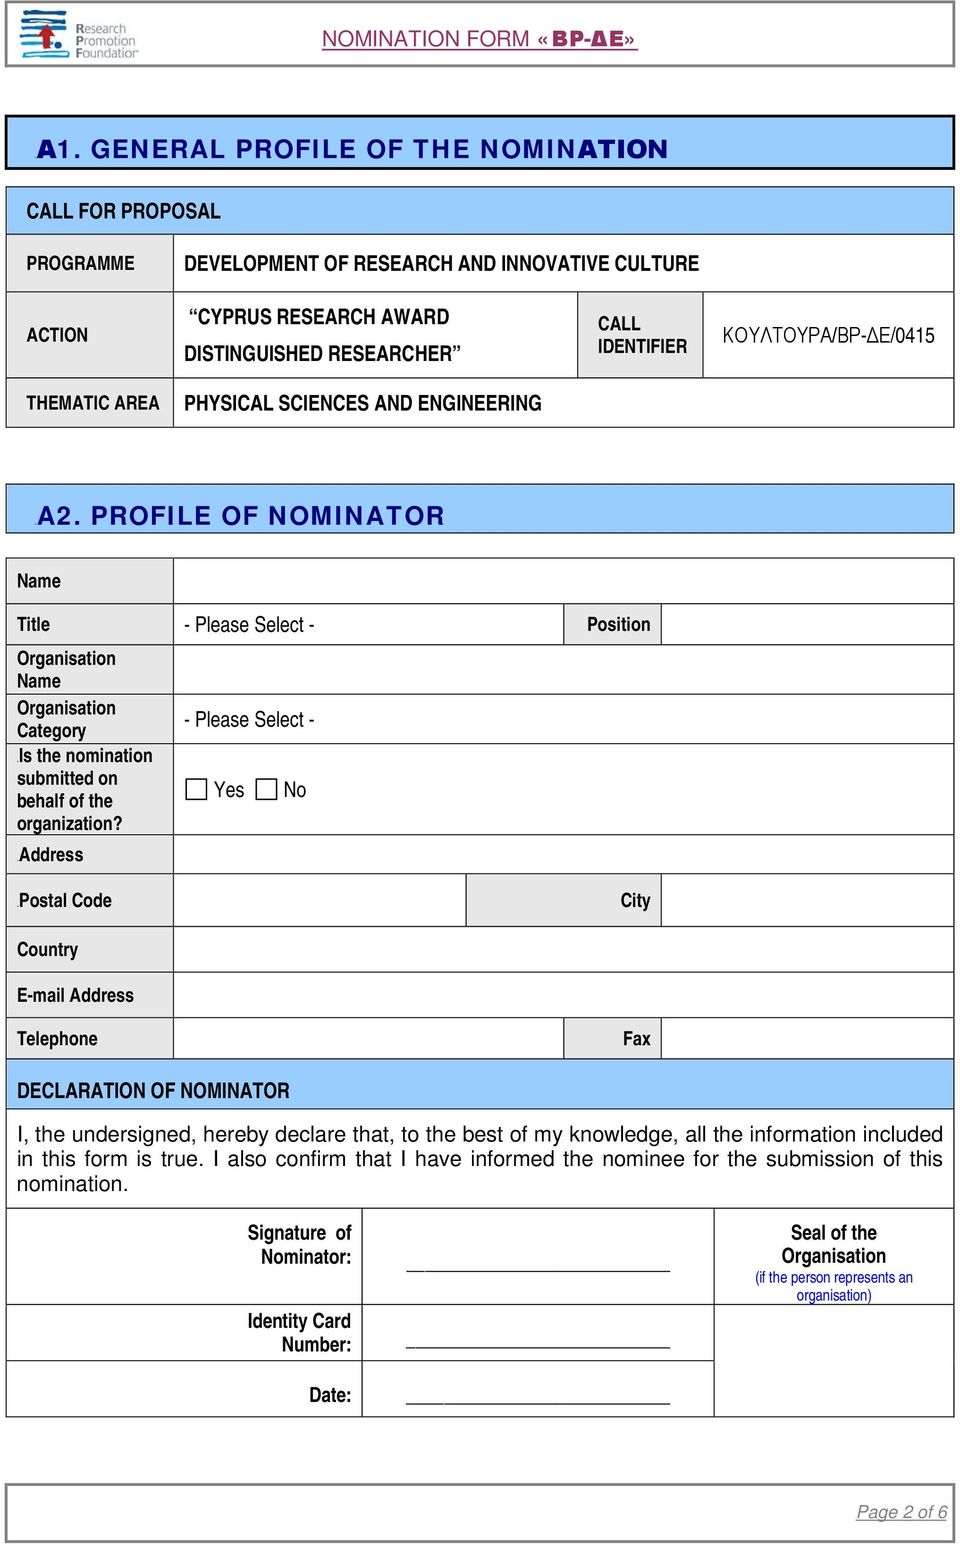 PROFILE OF NOMINATOR Name Title - Please Select - Position Name Category 6BIs the nomination submitted on behalf of the organization?